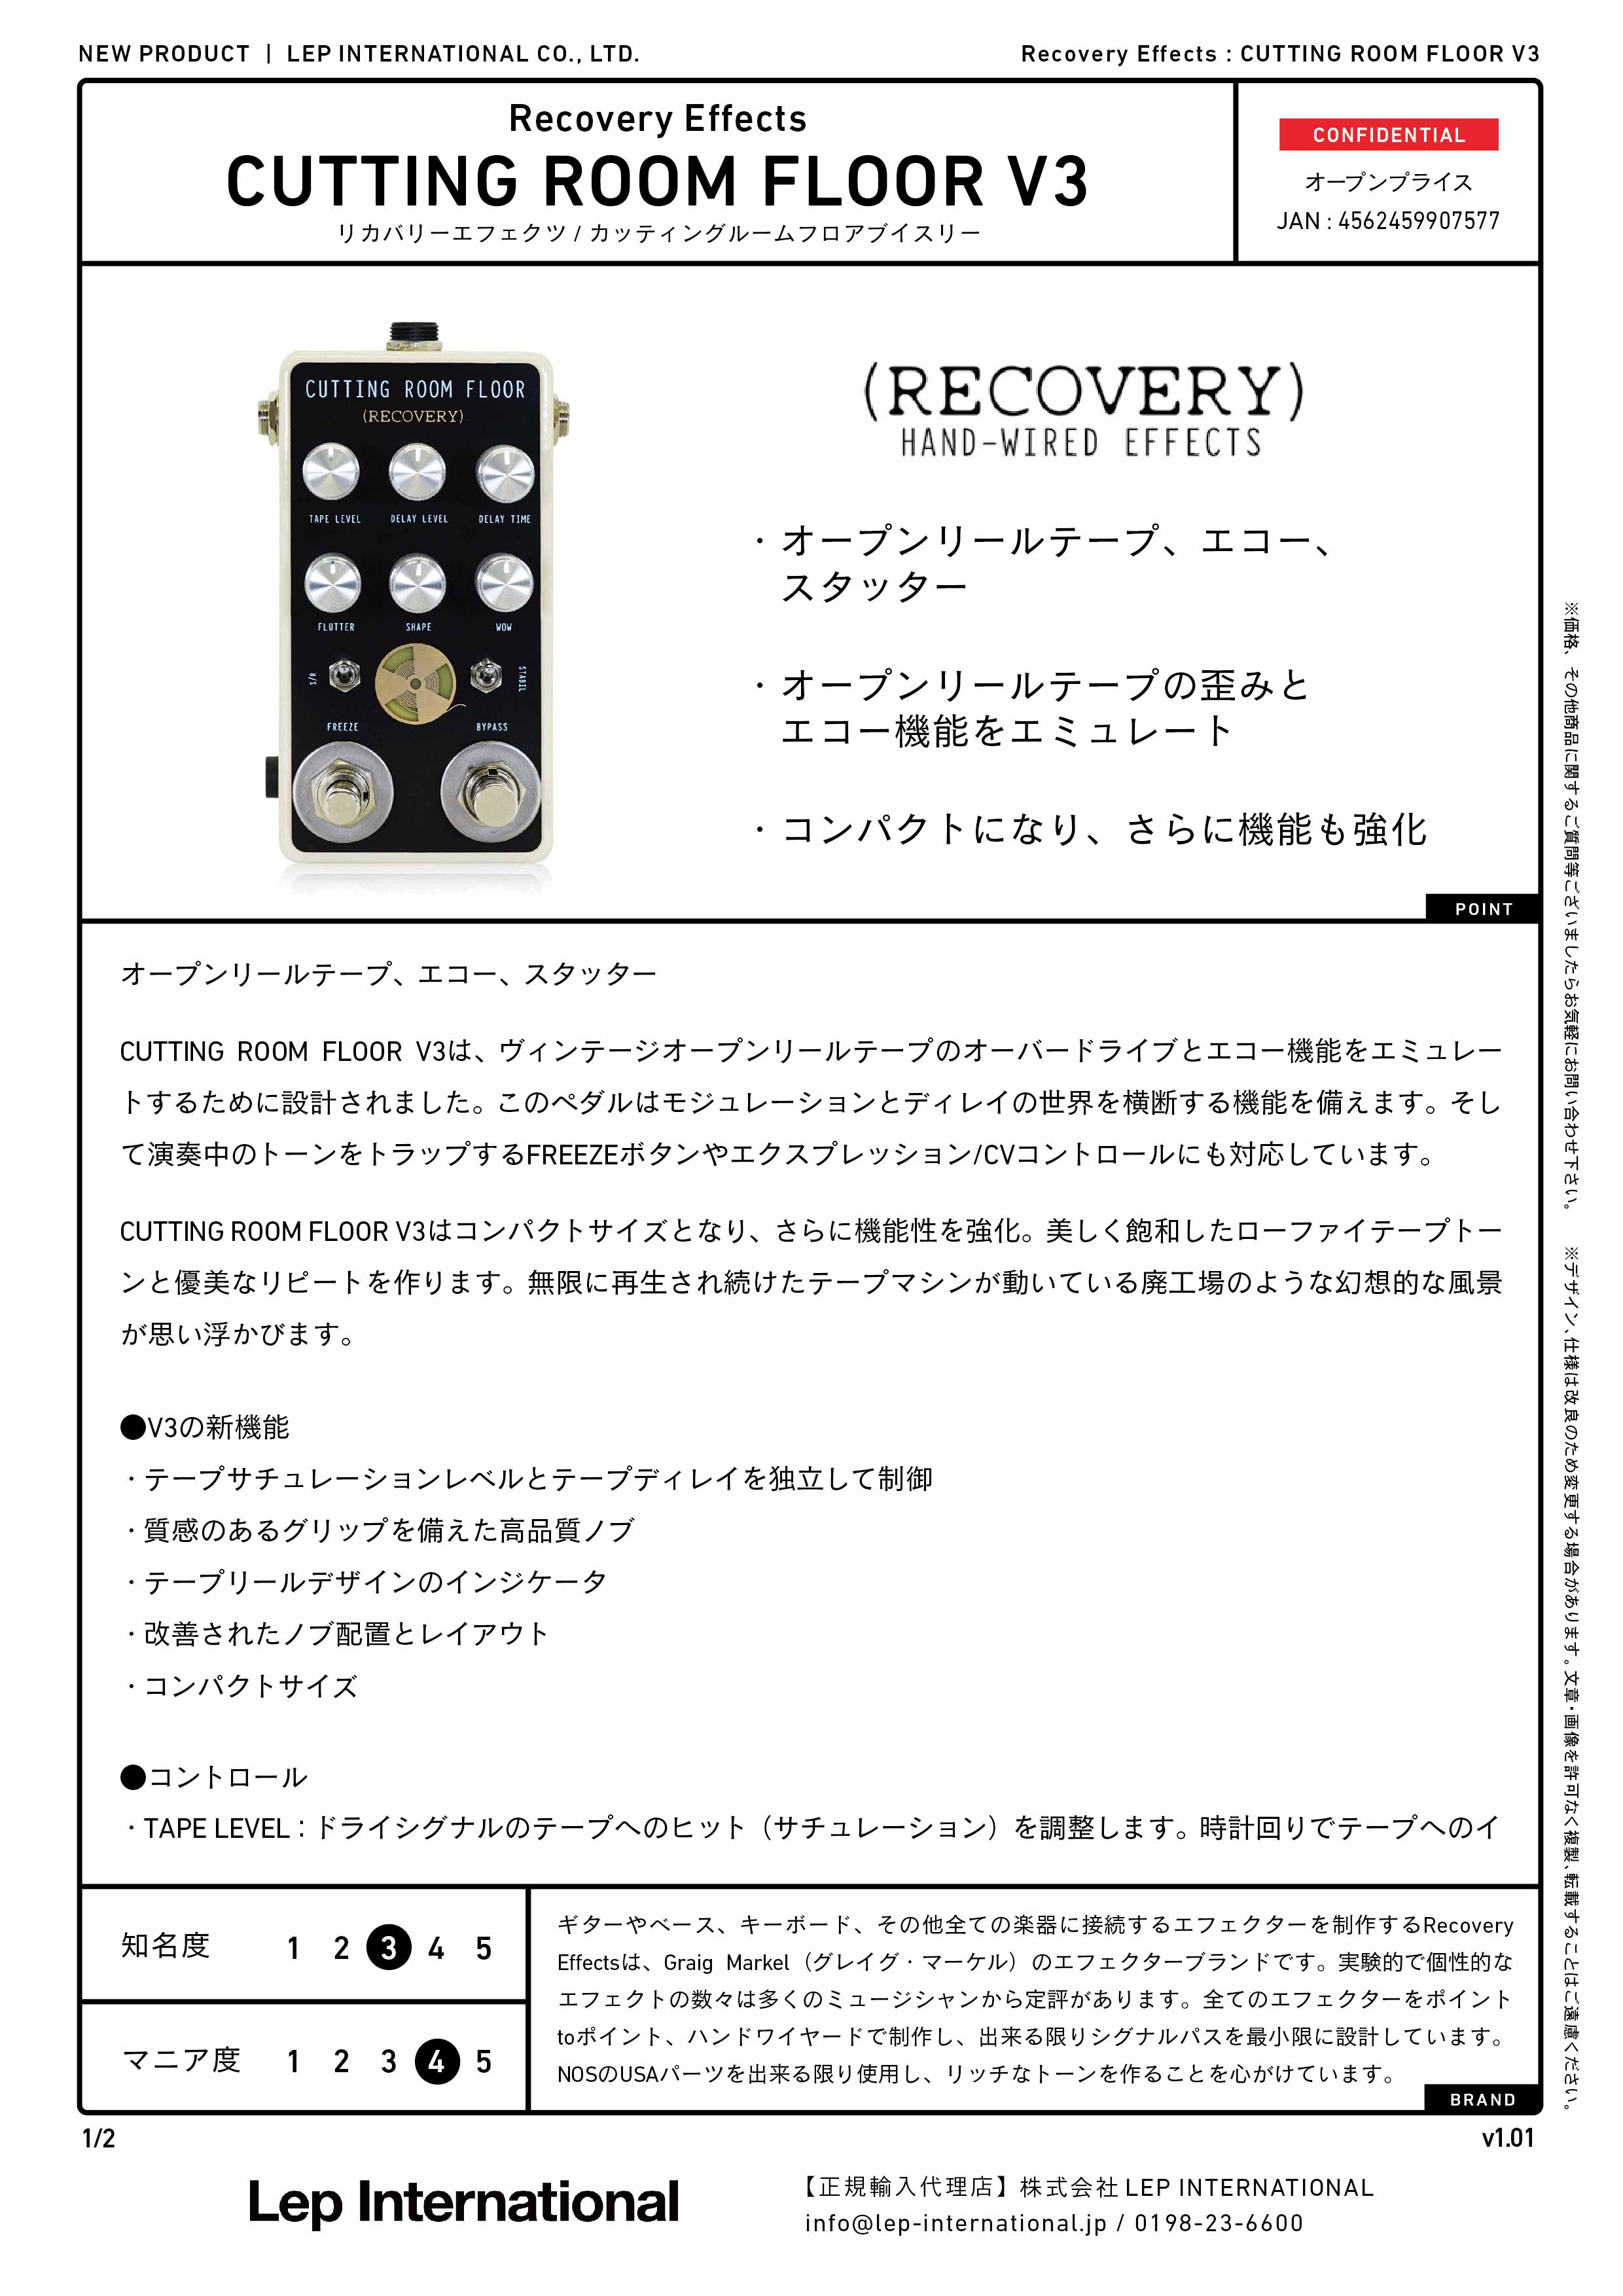 Recovery Effects / CUTTING ROOM FLOOR V3 – LEP INTERNATIONAL